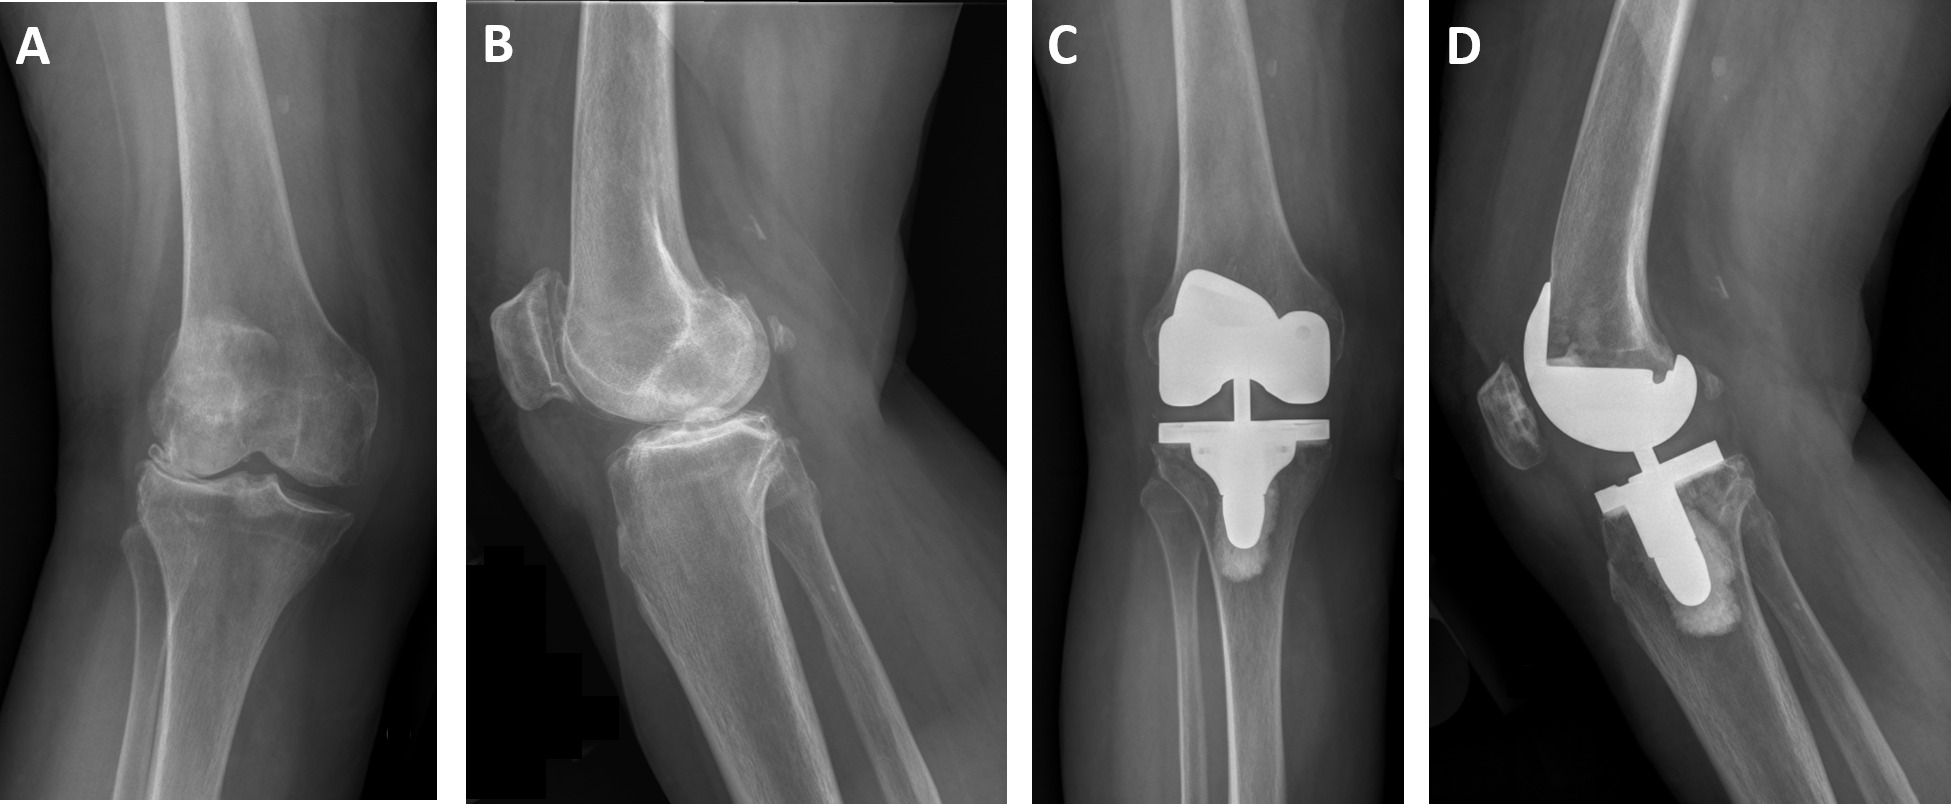 Fig. 1 
          a) Preoperative anteroposterior; and b) lateral radiographs of a patient with a valgus deformity. c) Posteroperative anteroposterior; and d) lateral radiographs depicting correction of the valgus deformity with the posterior-stabilized femoral component and varus-valgus insert.
        